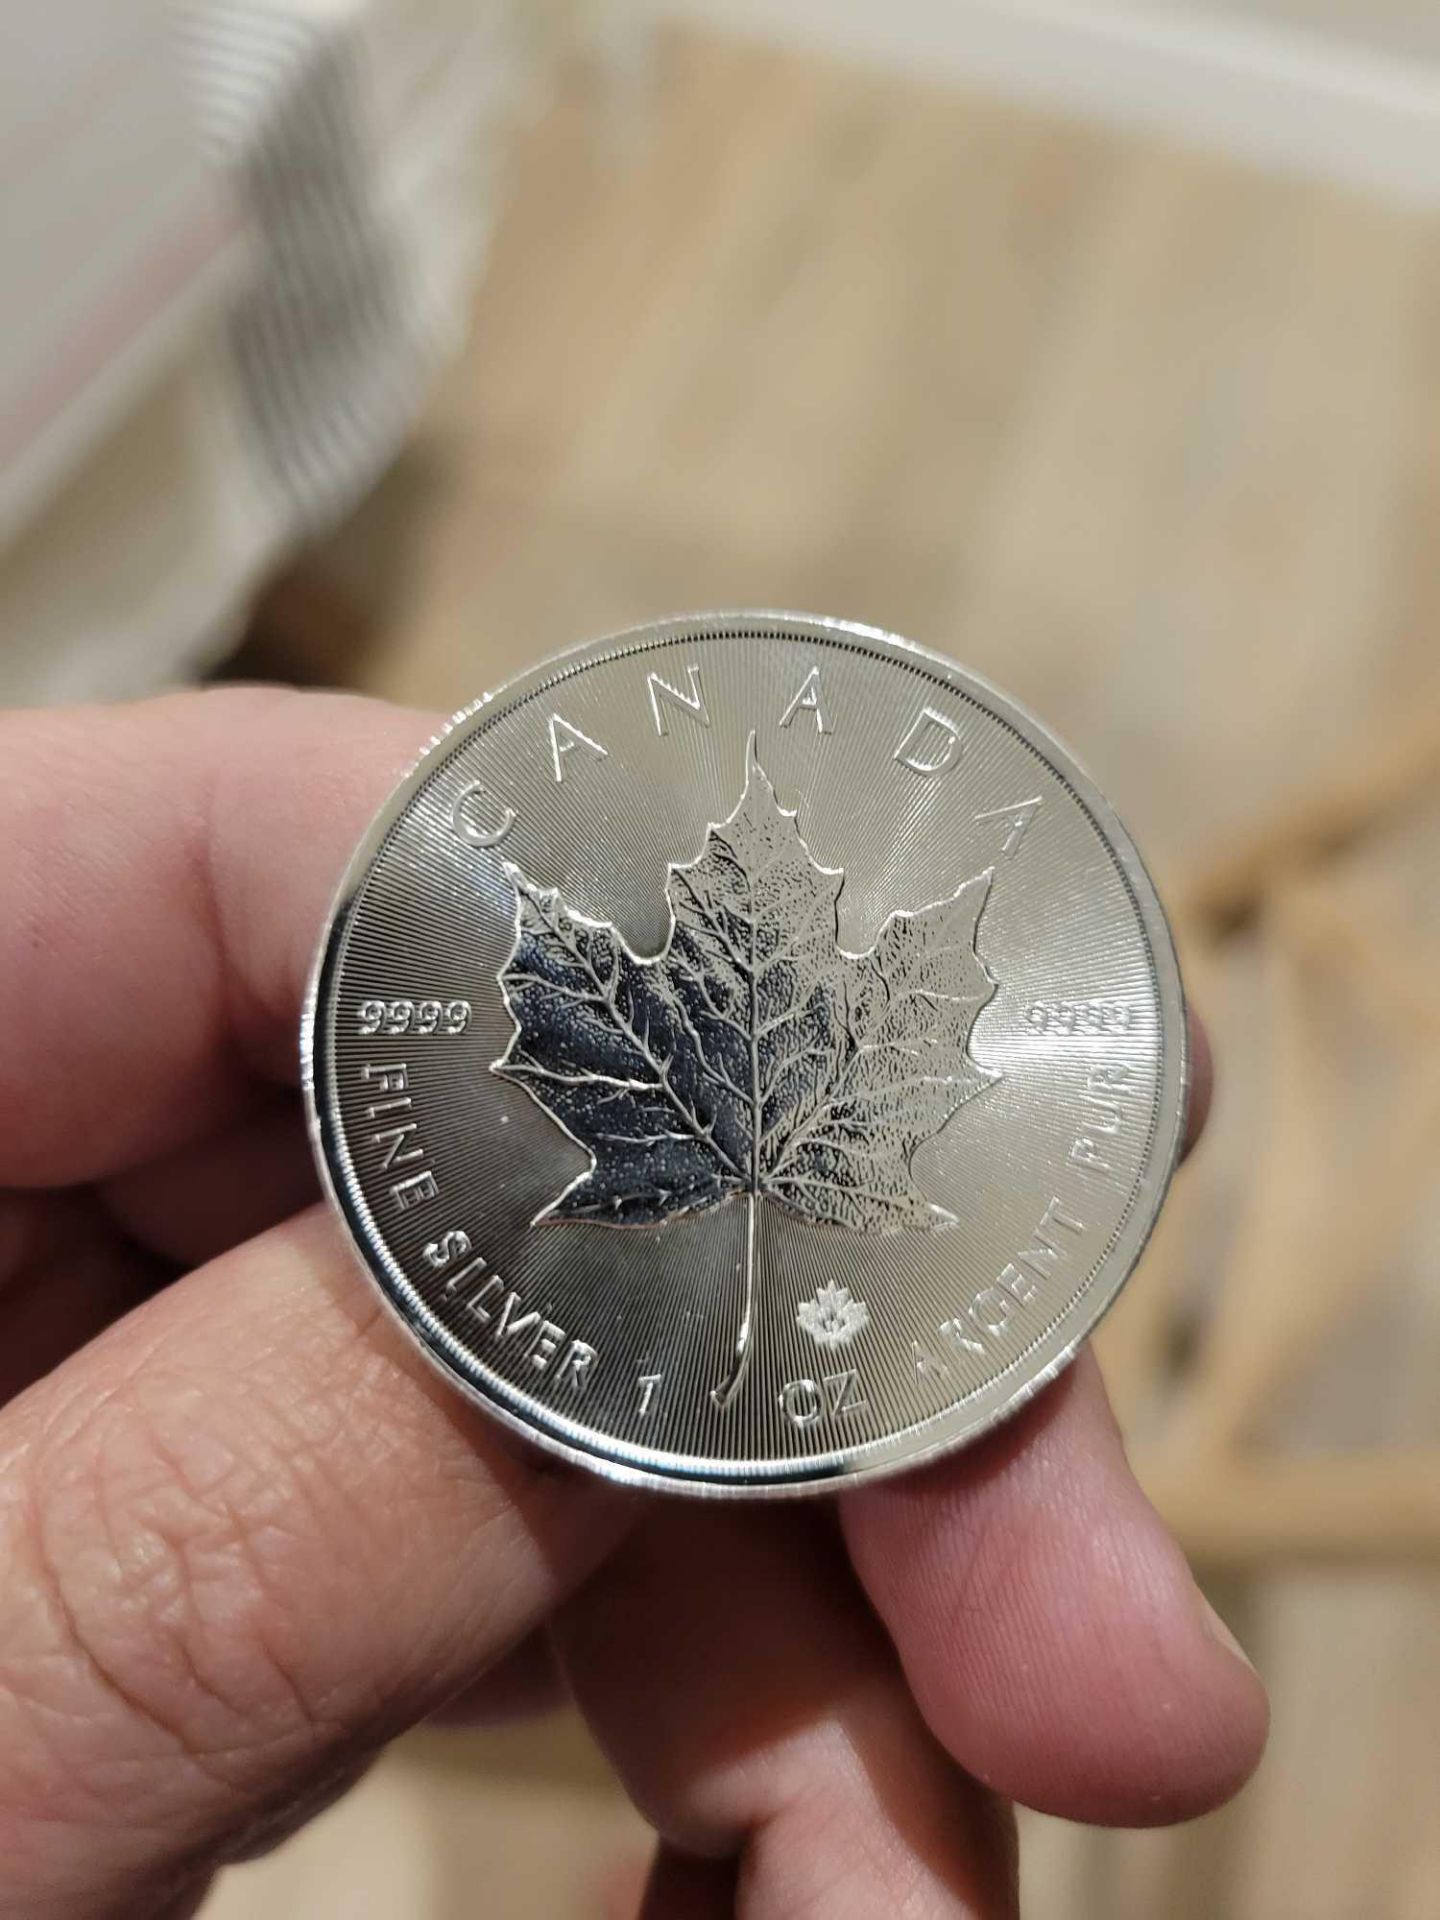 2 2019 Canadian Maple Leaf Silver Coins - Image 2 of 4